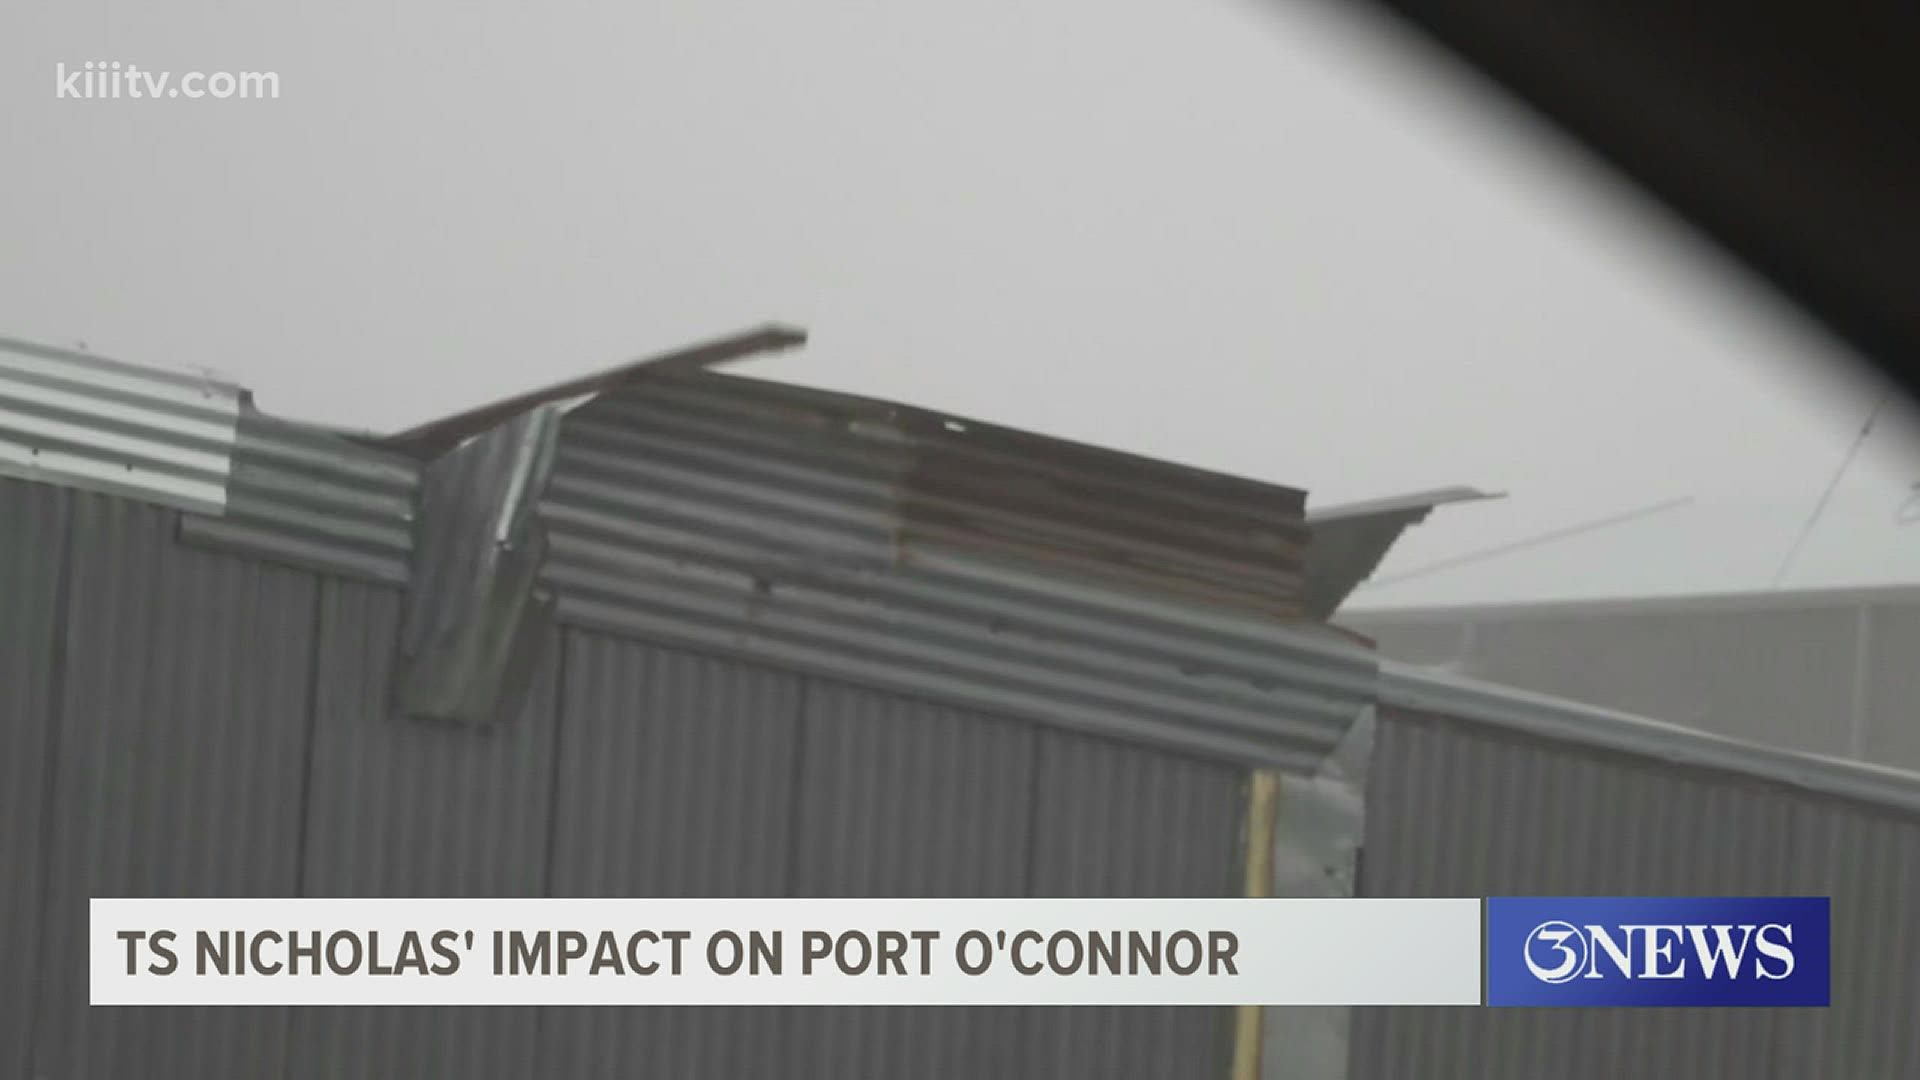 Bill Churchwell gives a final update on Port O'Connor, and how they're navigating the final moments of the storm.